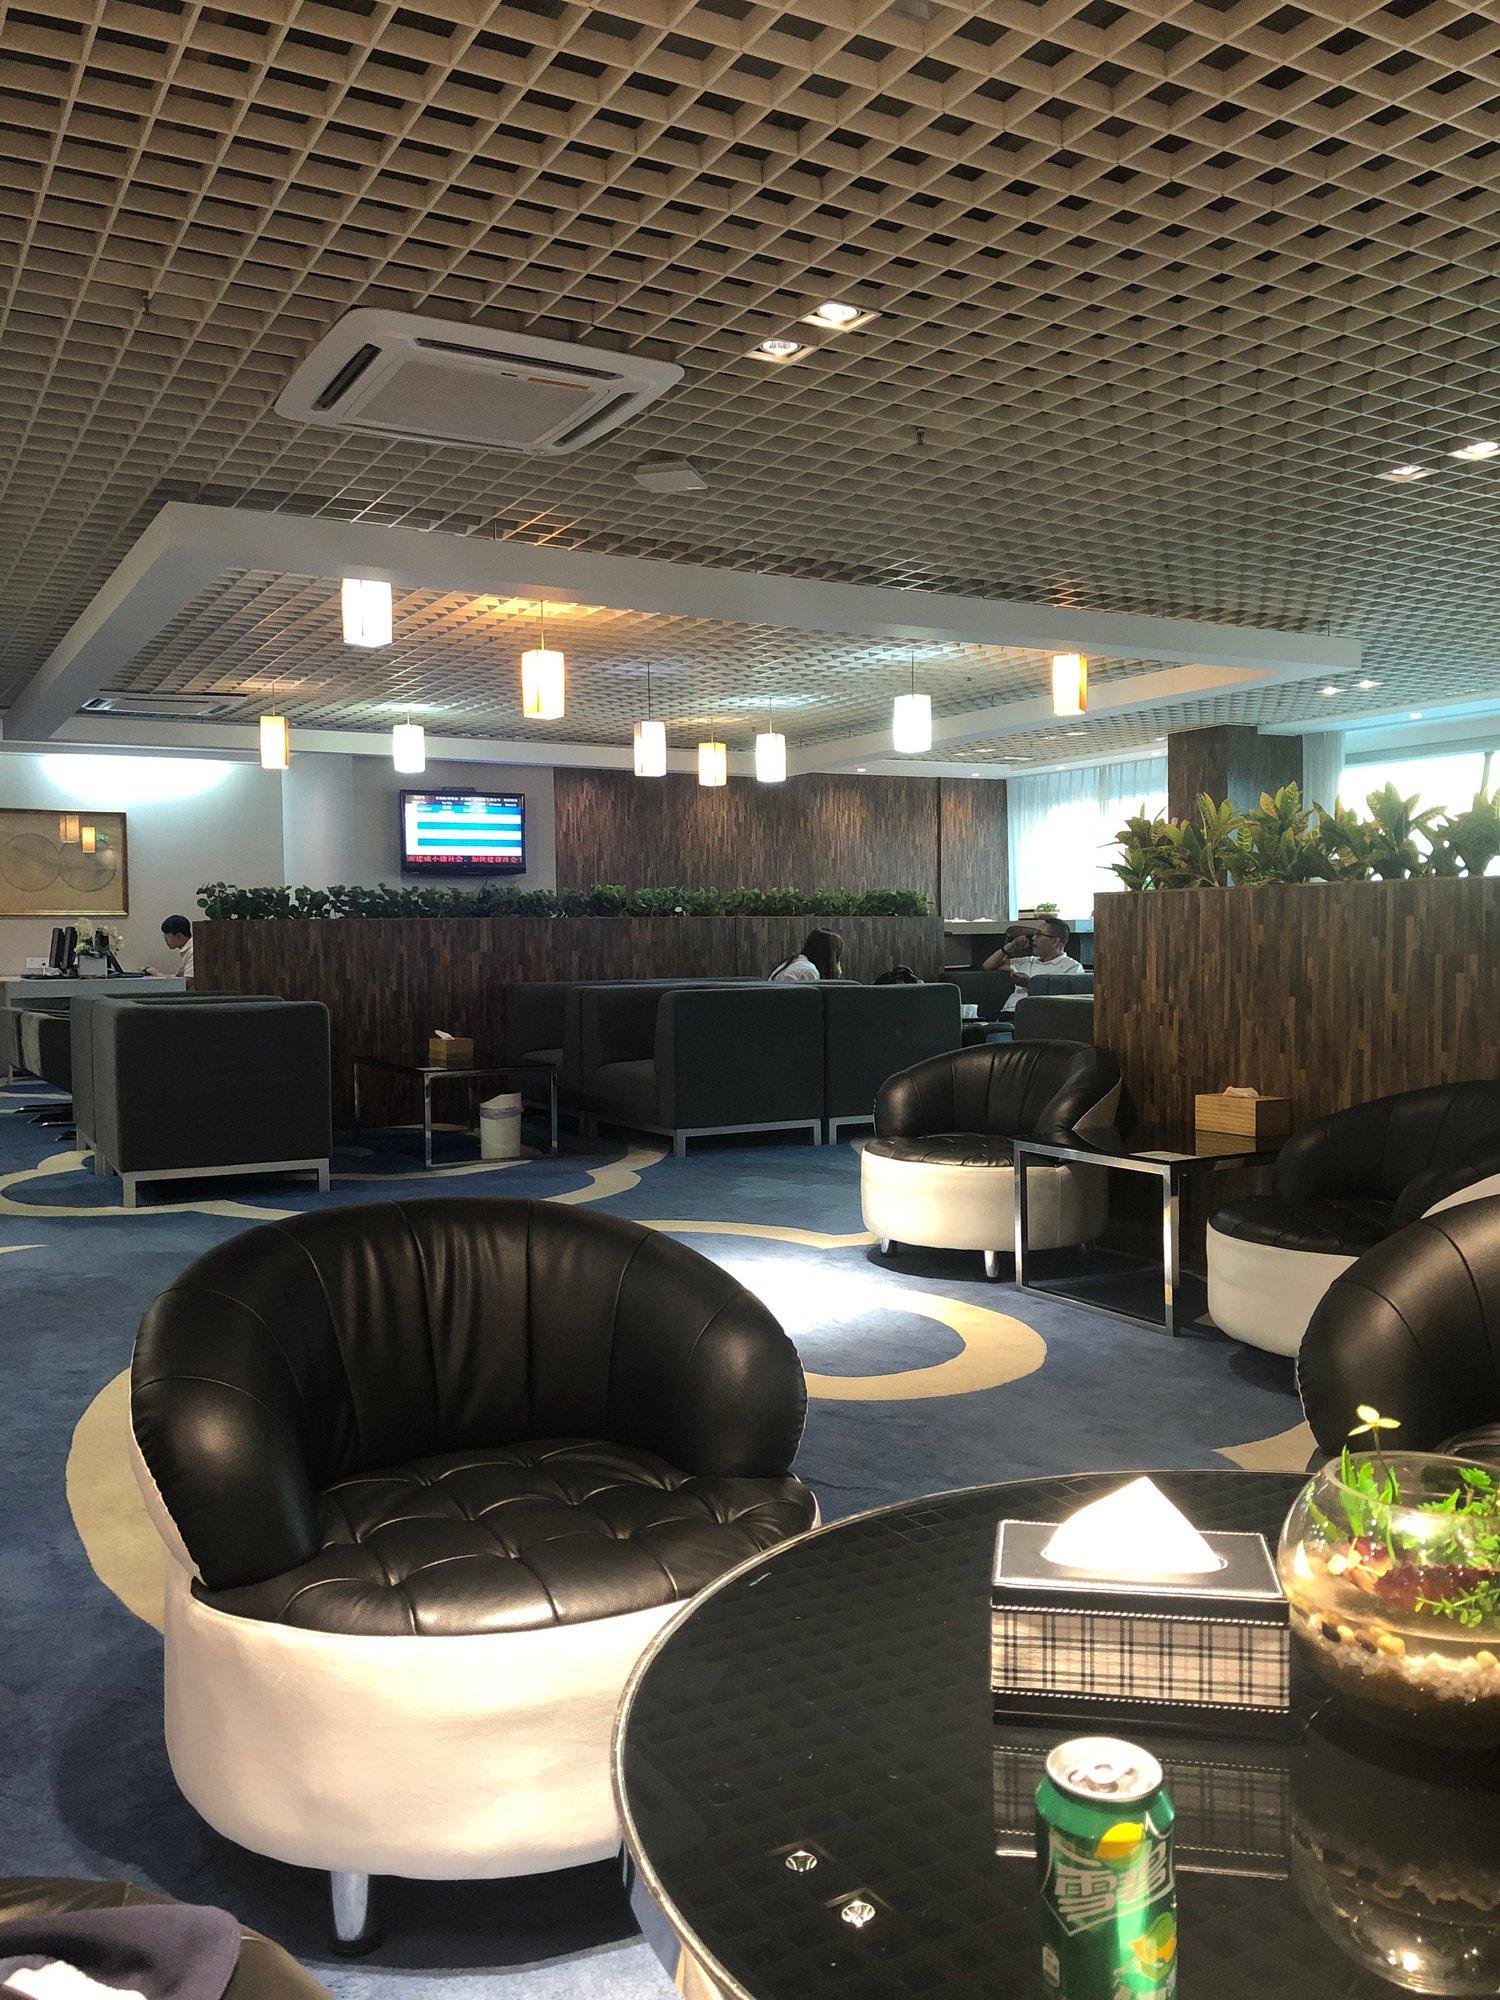 First Class Lounge image 1 of 1